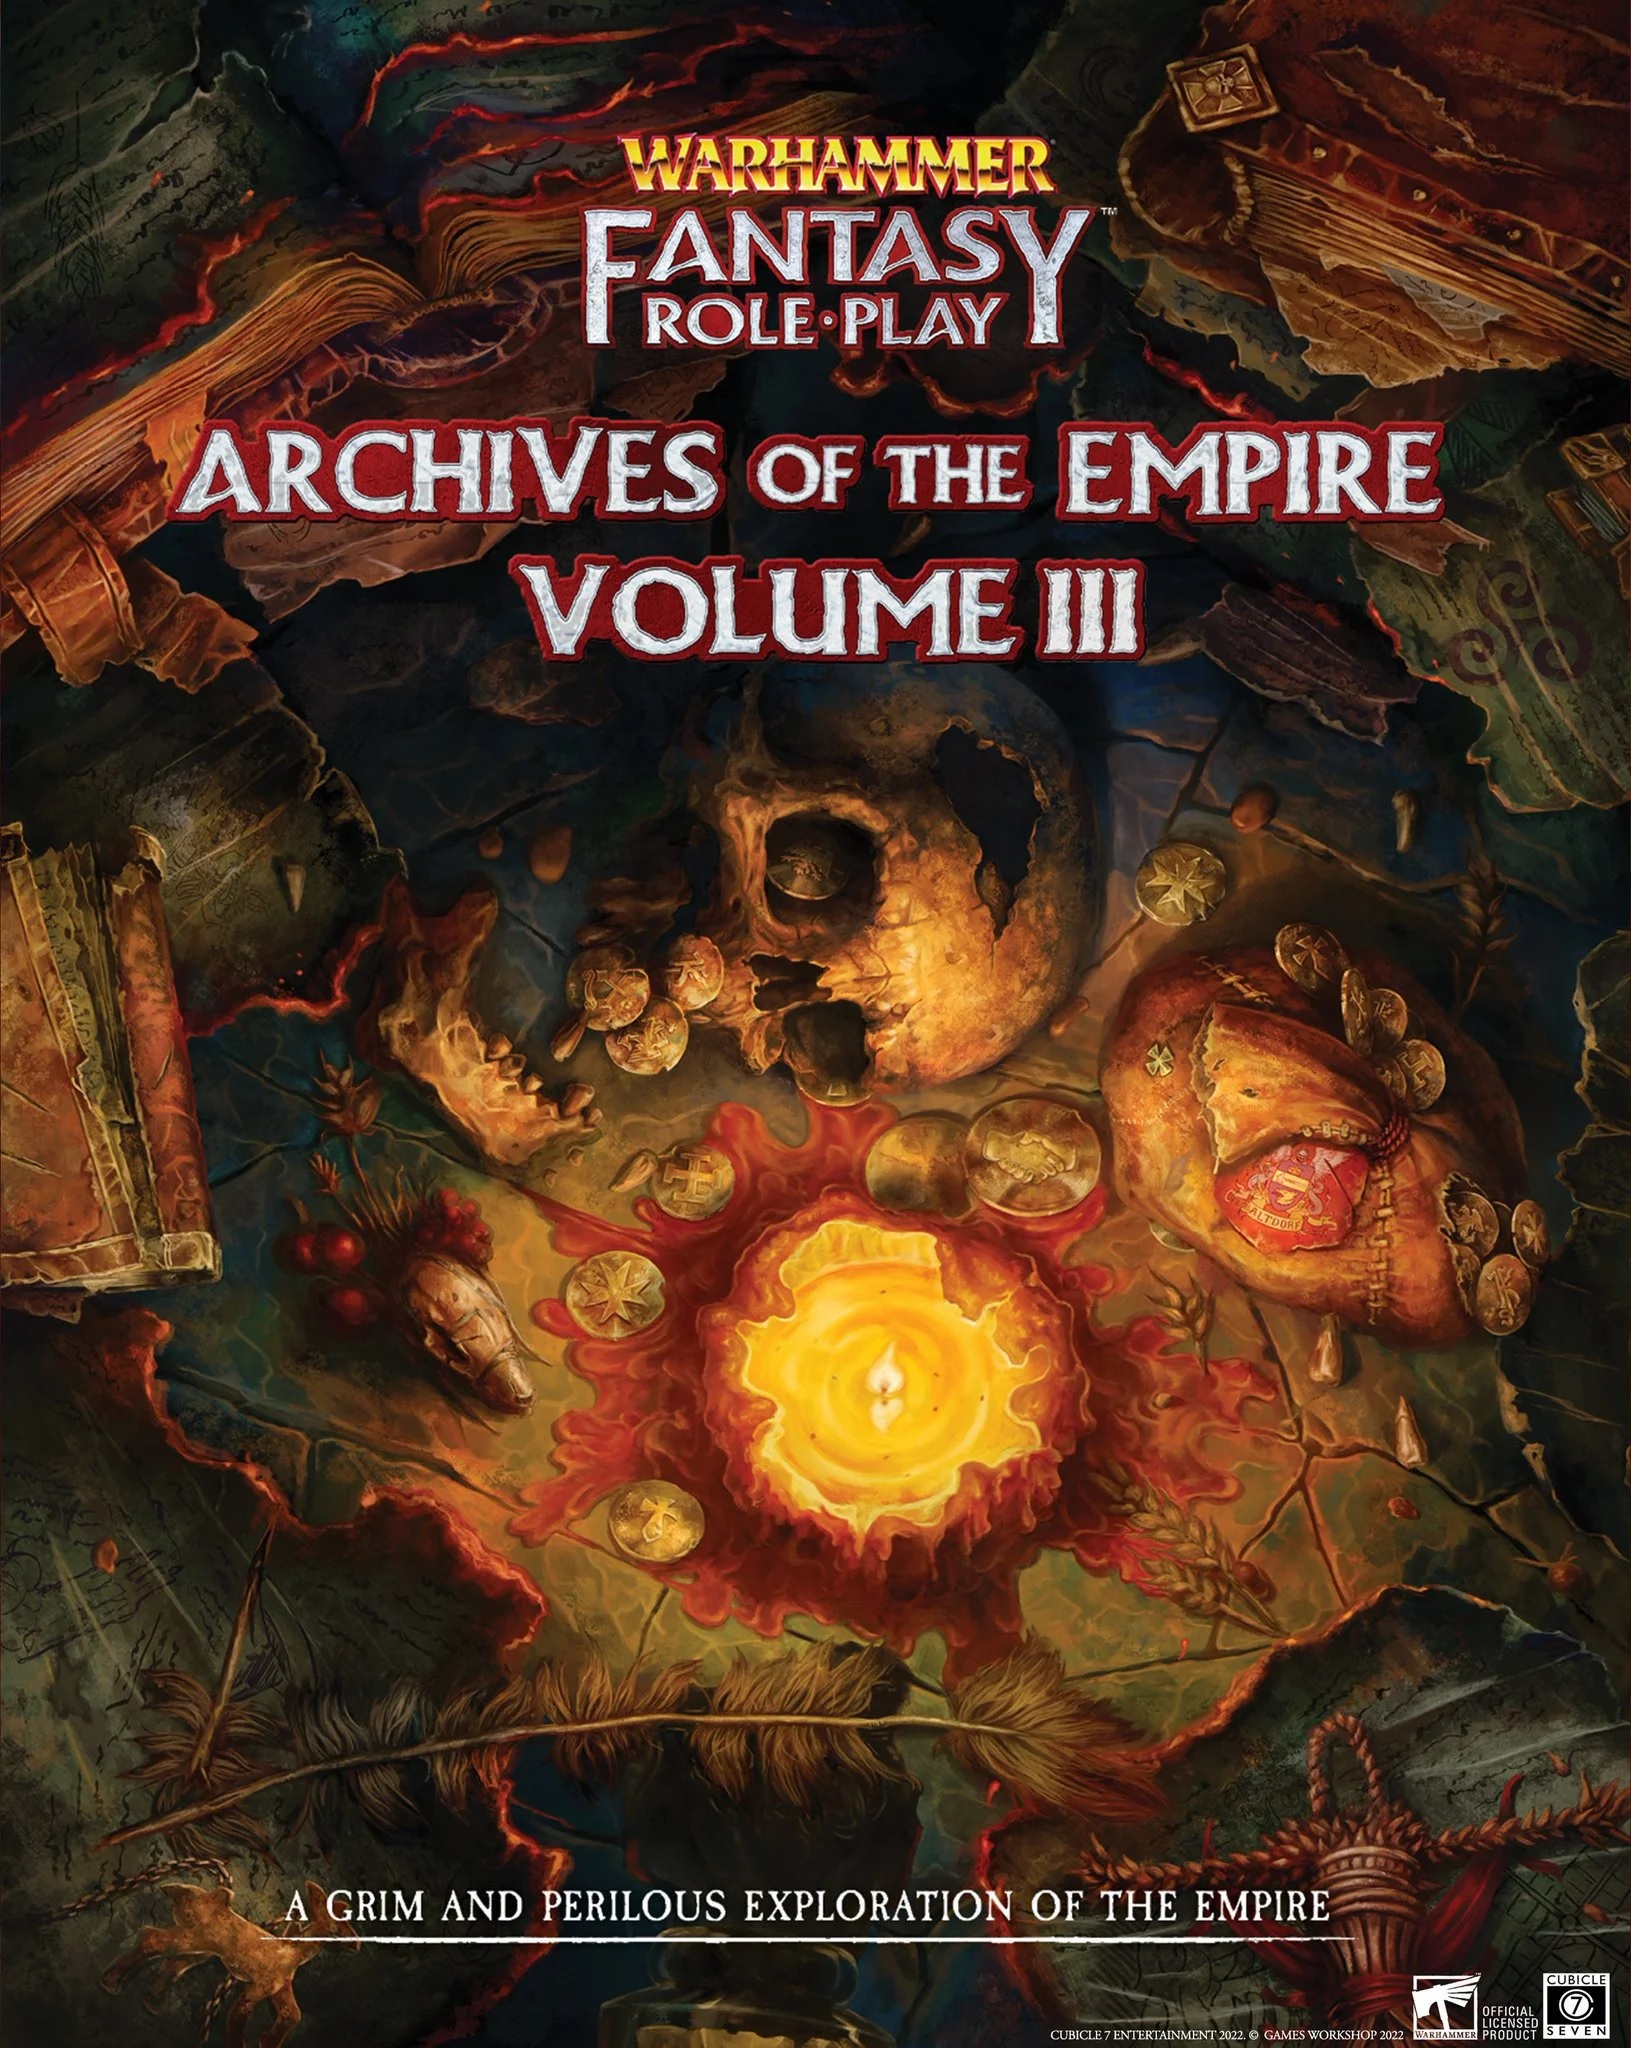 Warhammer Fantasy Roleplay (4th Ed): ARCHIVES OF THE EMPIRE: VOLUME 3 